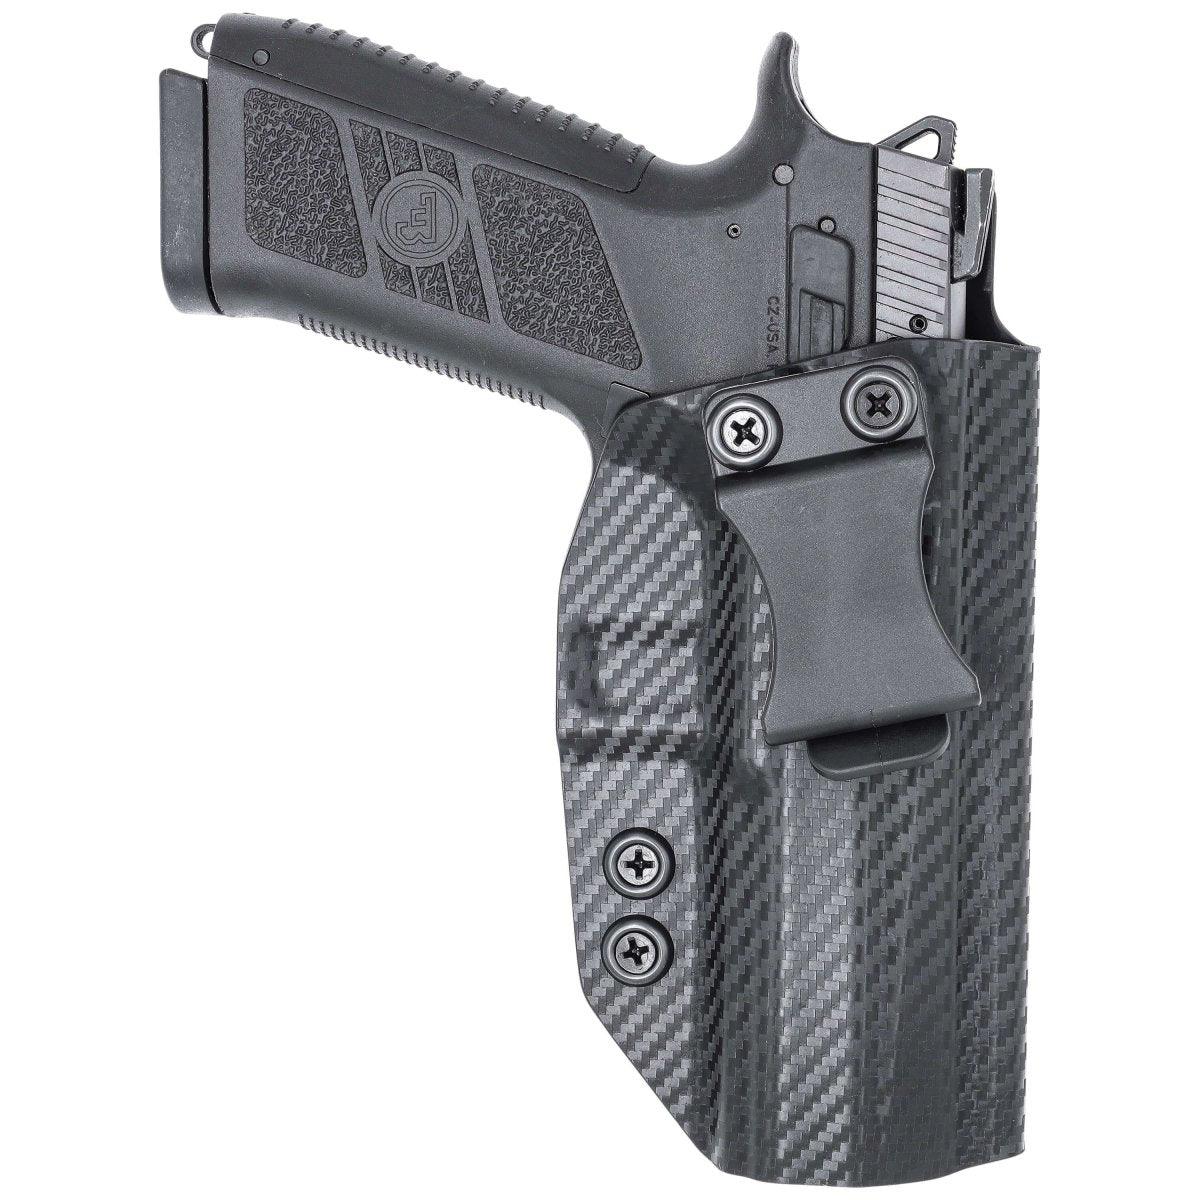 CZ P-07 KYDEX Holsters